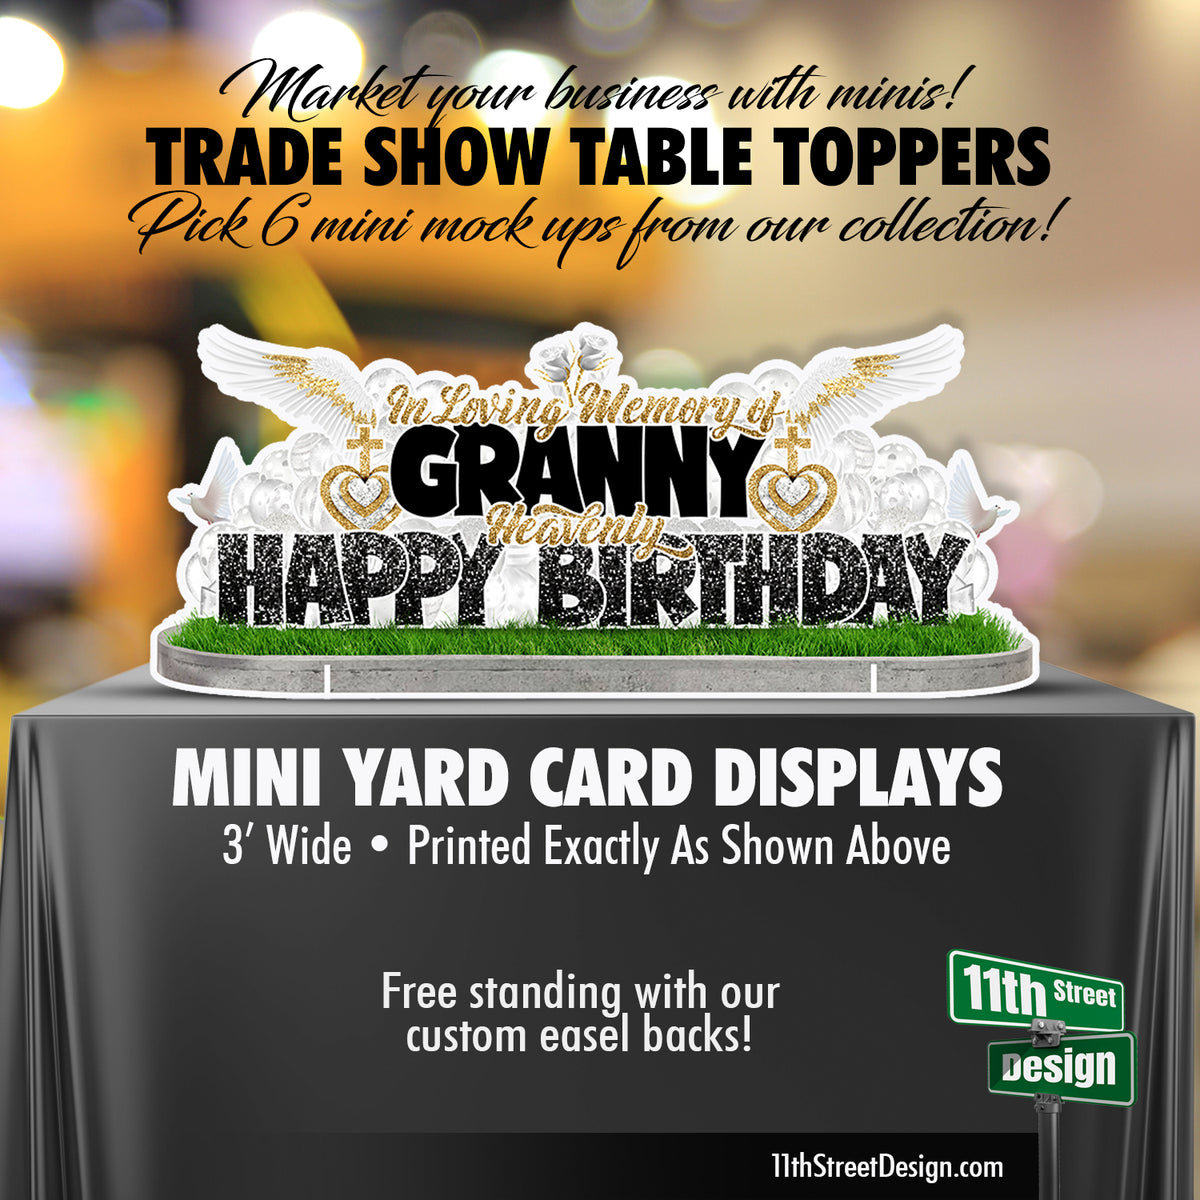 Pick 6 - Trade Show Table Toppers - Mini Yard Card Displays